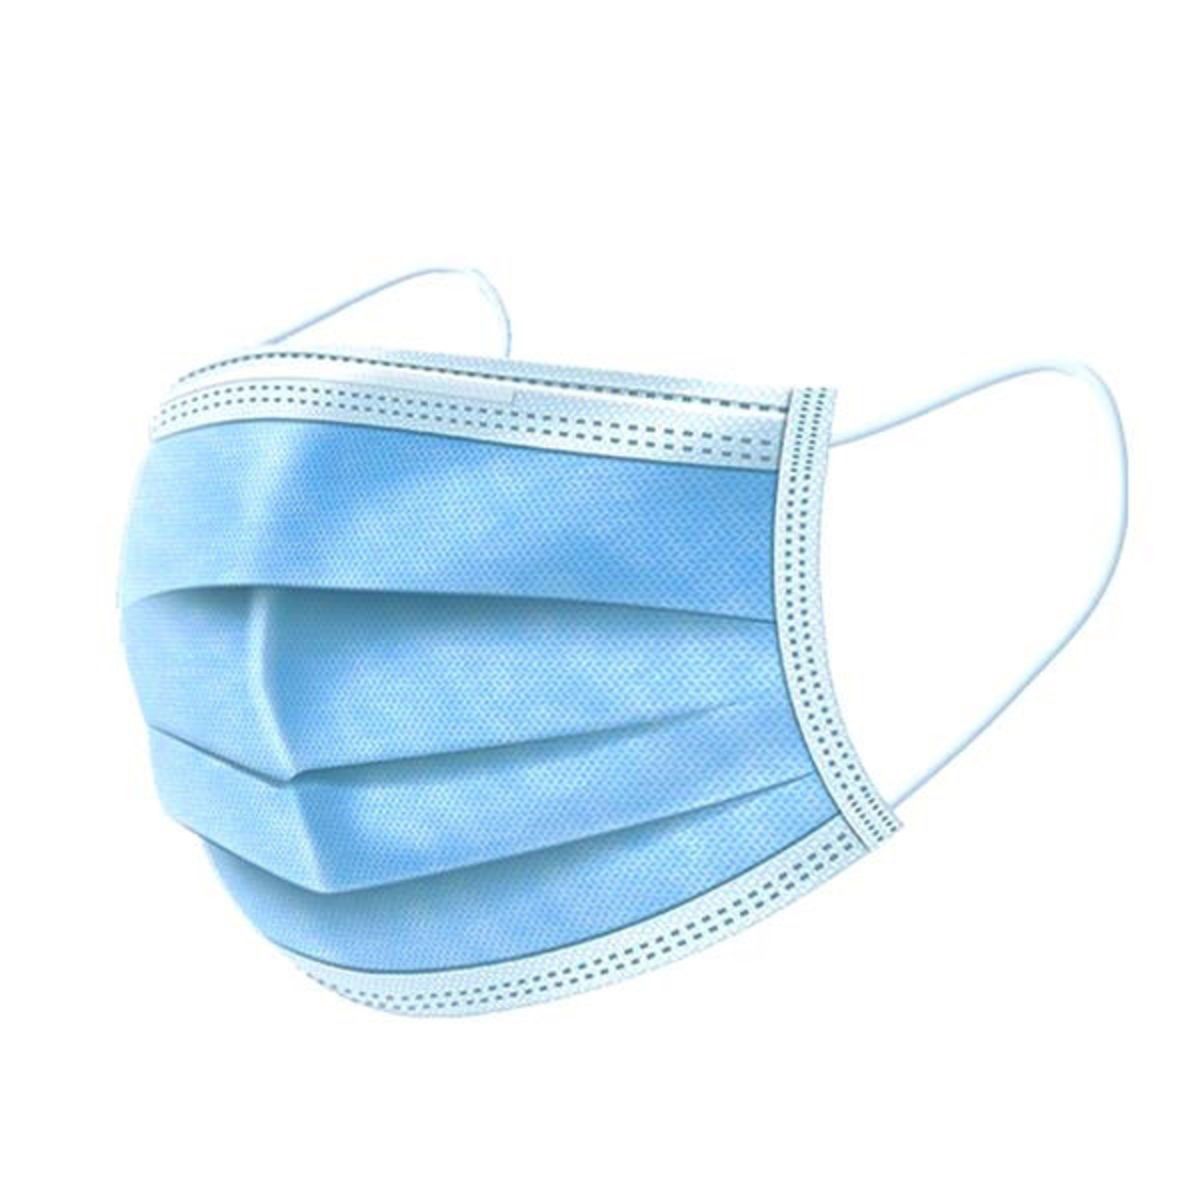 Disposable Face Masks - Box of 20